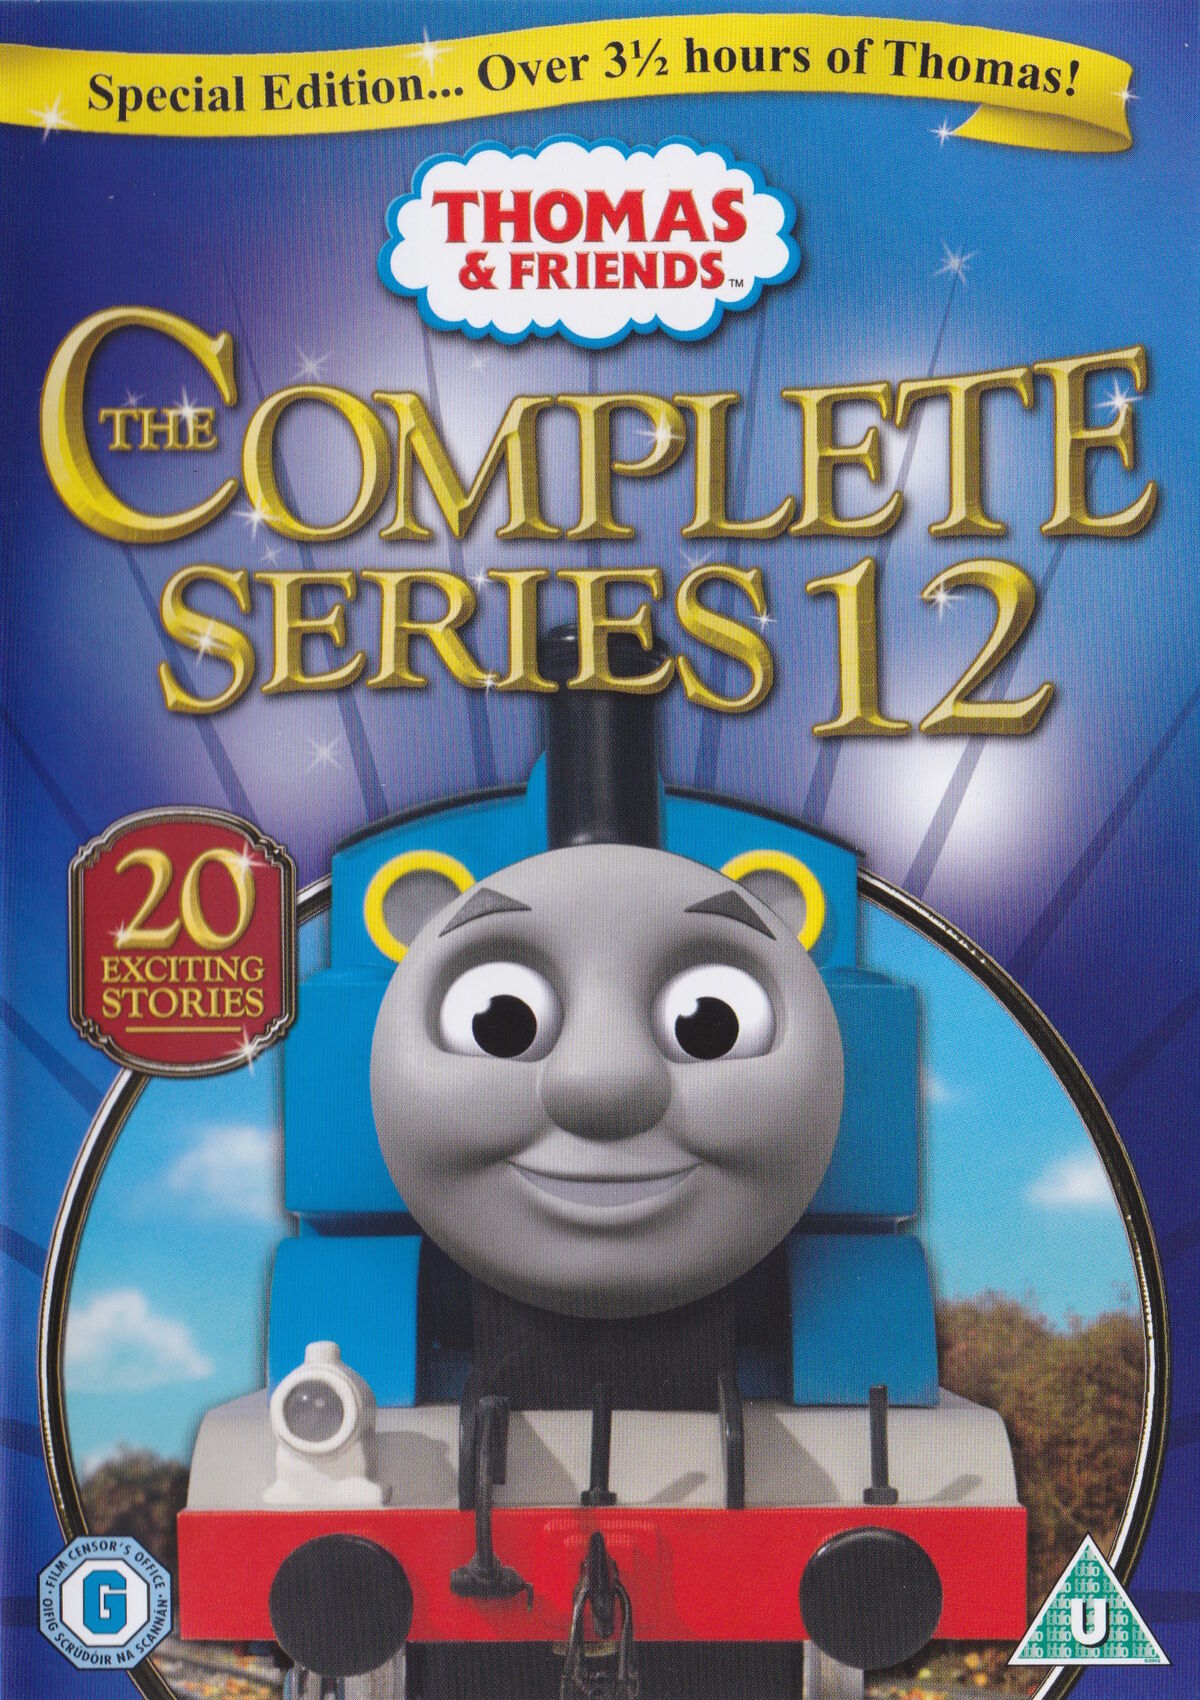 The Complete Series 12 | Thomas the Tank Engine Wiki | Fandom